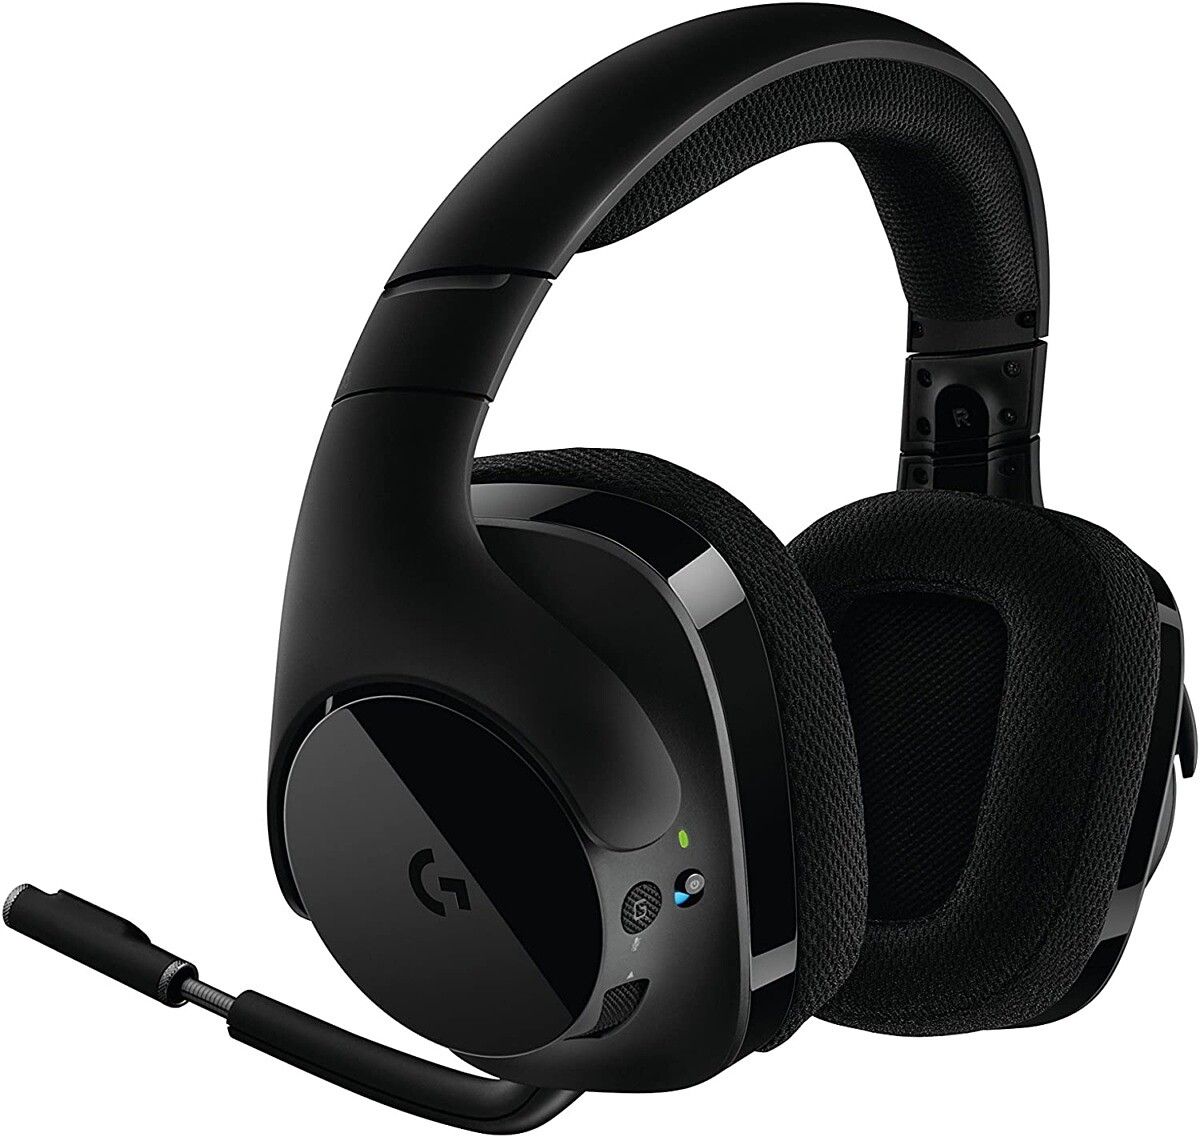 Stop messing with headset wires. Logitech's wireless G533 headset is only $66, and this is a quality buy. With comfortable ear cups, great sound, and a long battery life, these will not disappoint.